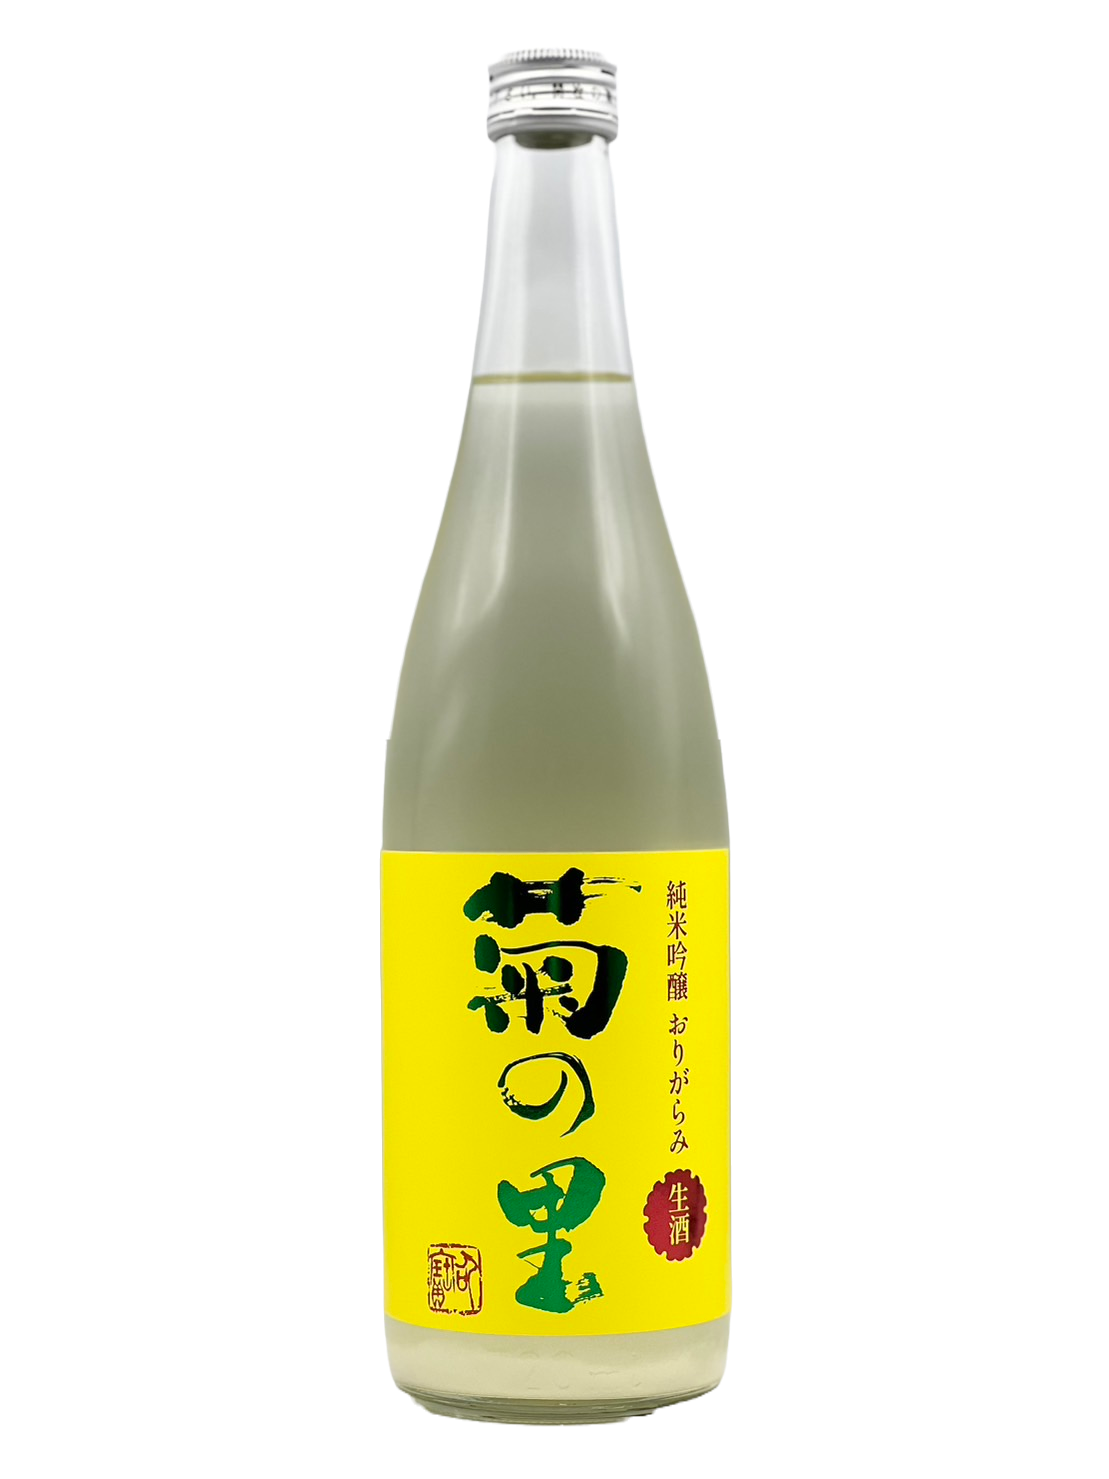 Village pure rice brewing sake from the finest rice of chrysanthemum